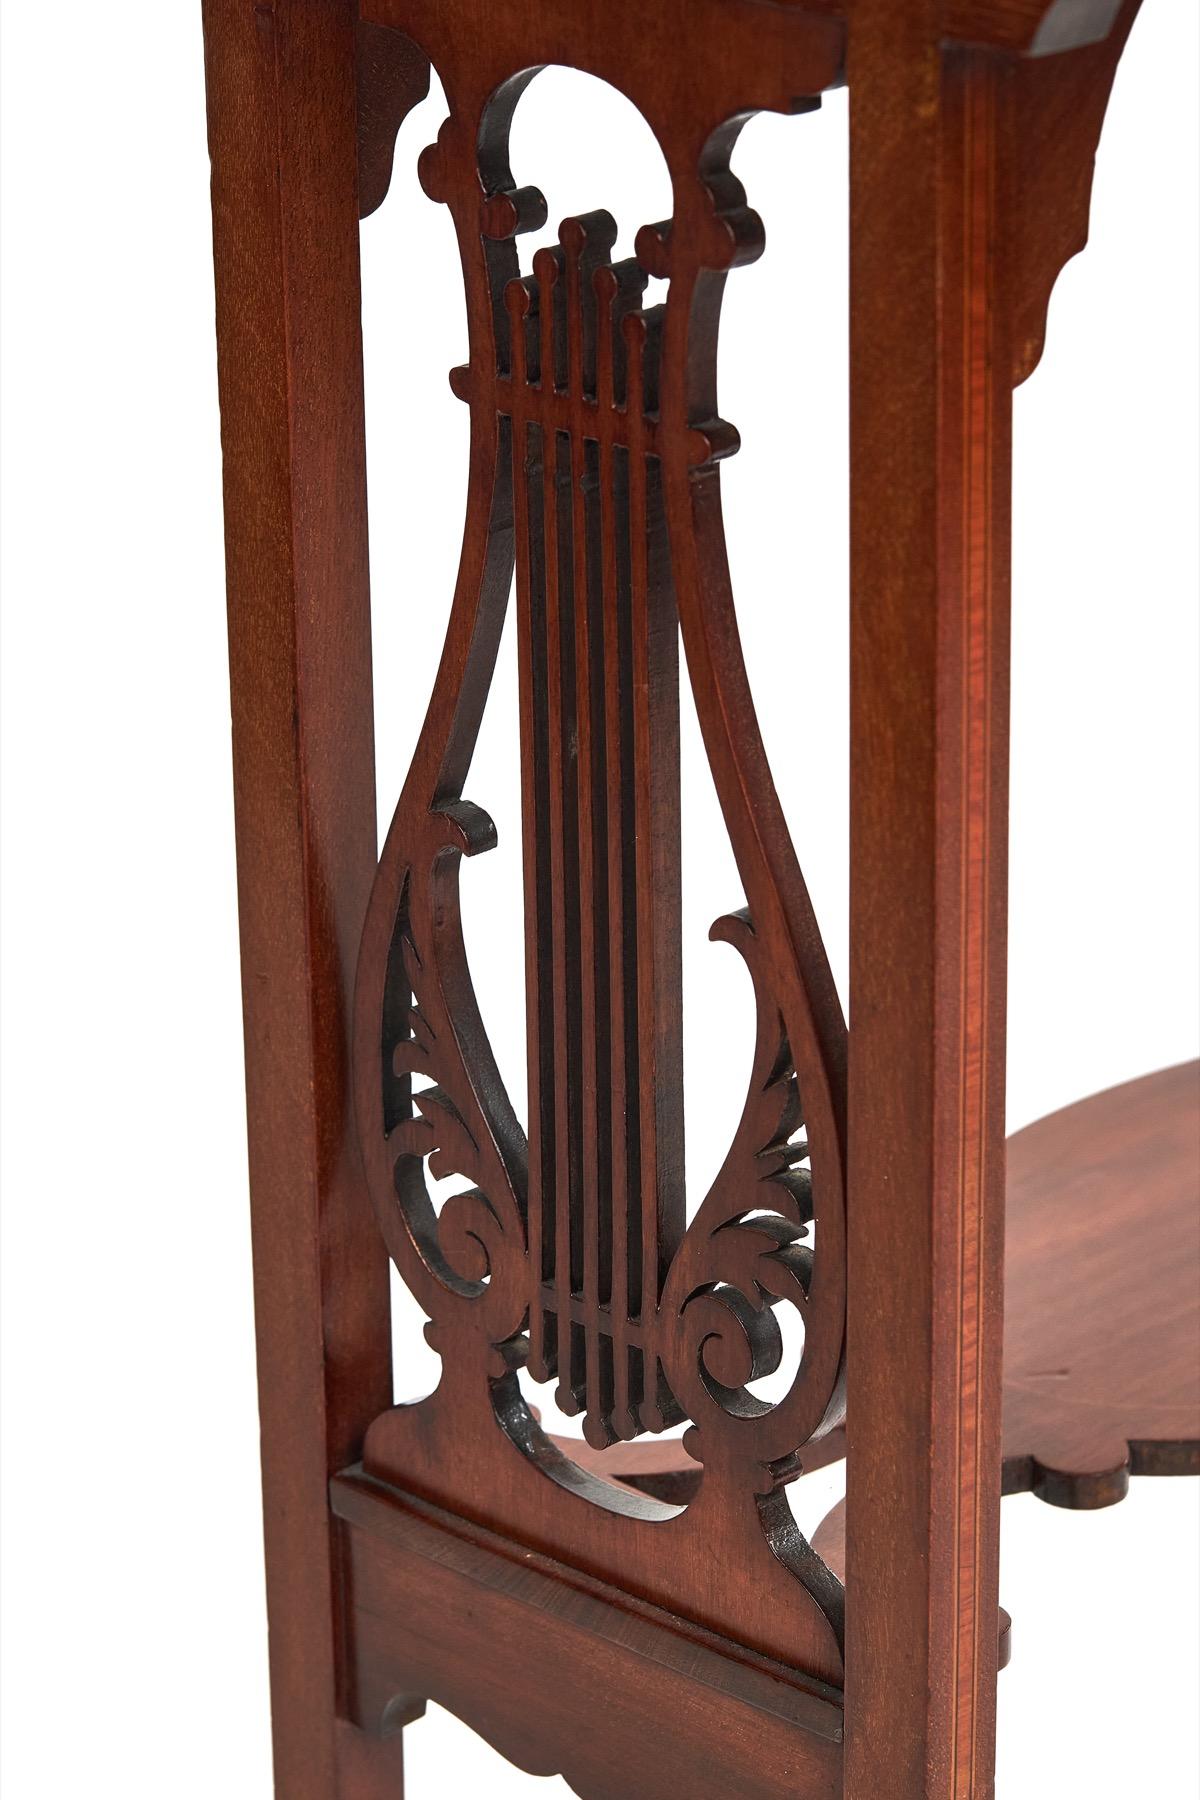 Polished Fine Sheraton Revival Mahogany Inlaid & carved Lyre end support table[B] For Sale